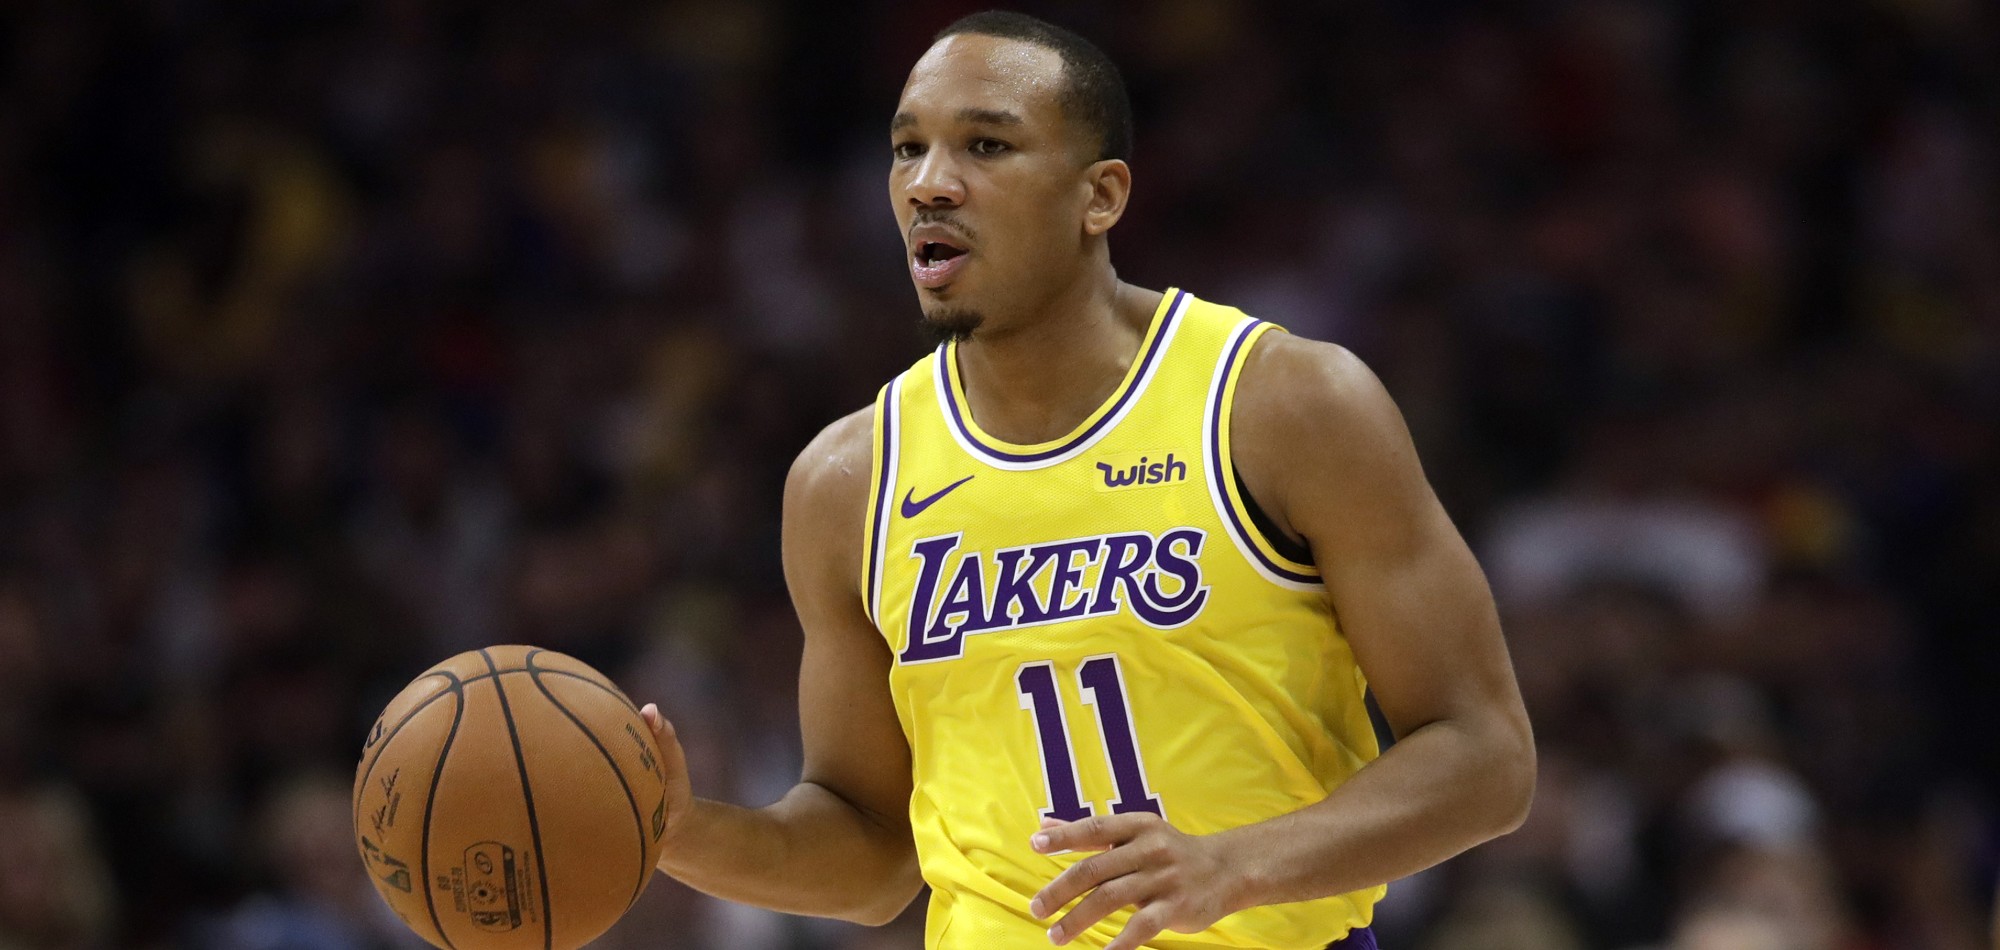 Lakers’ Bradley opts out of NBA’s restart, cites son’s health